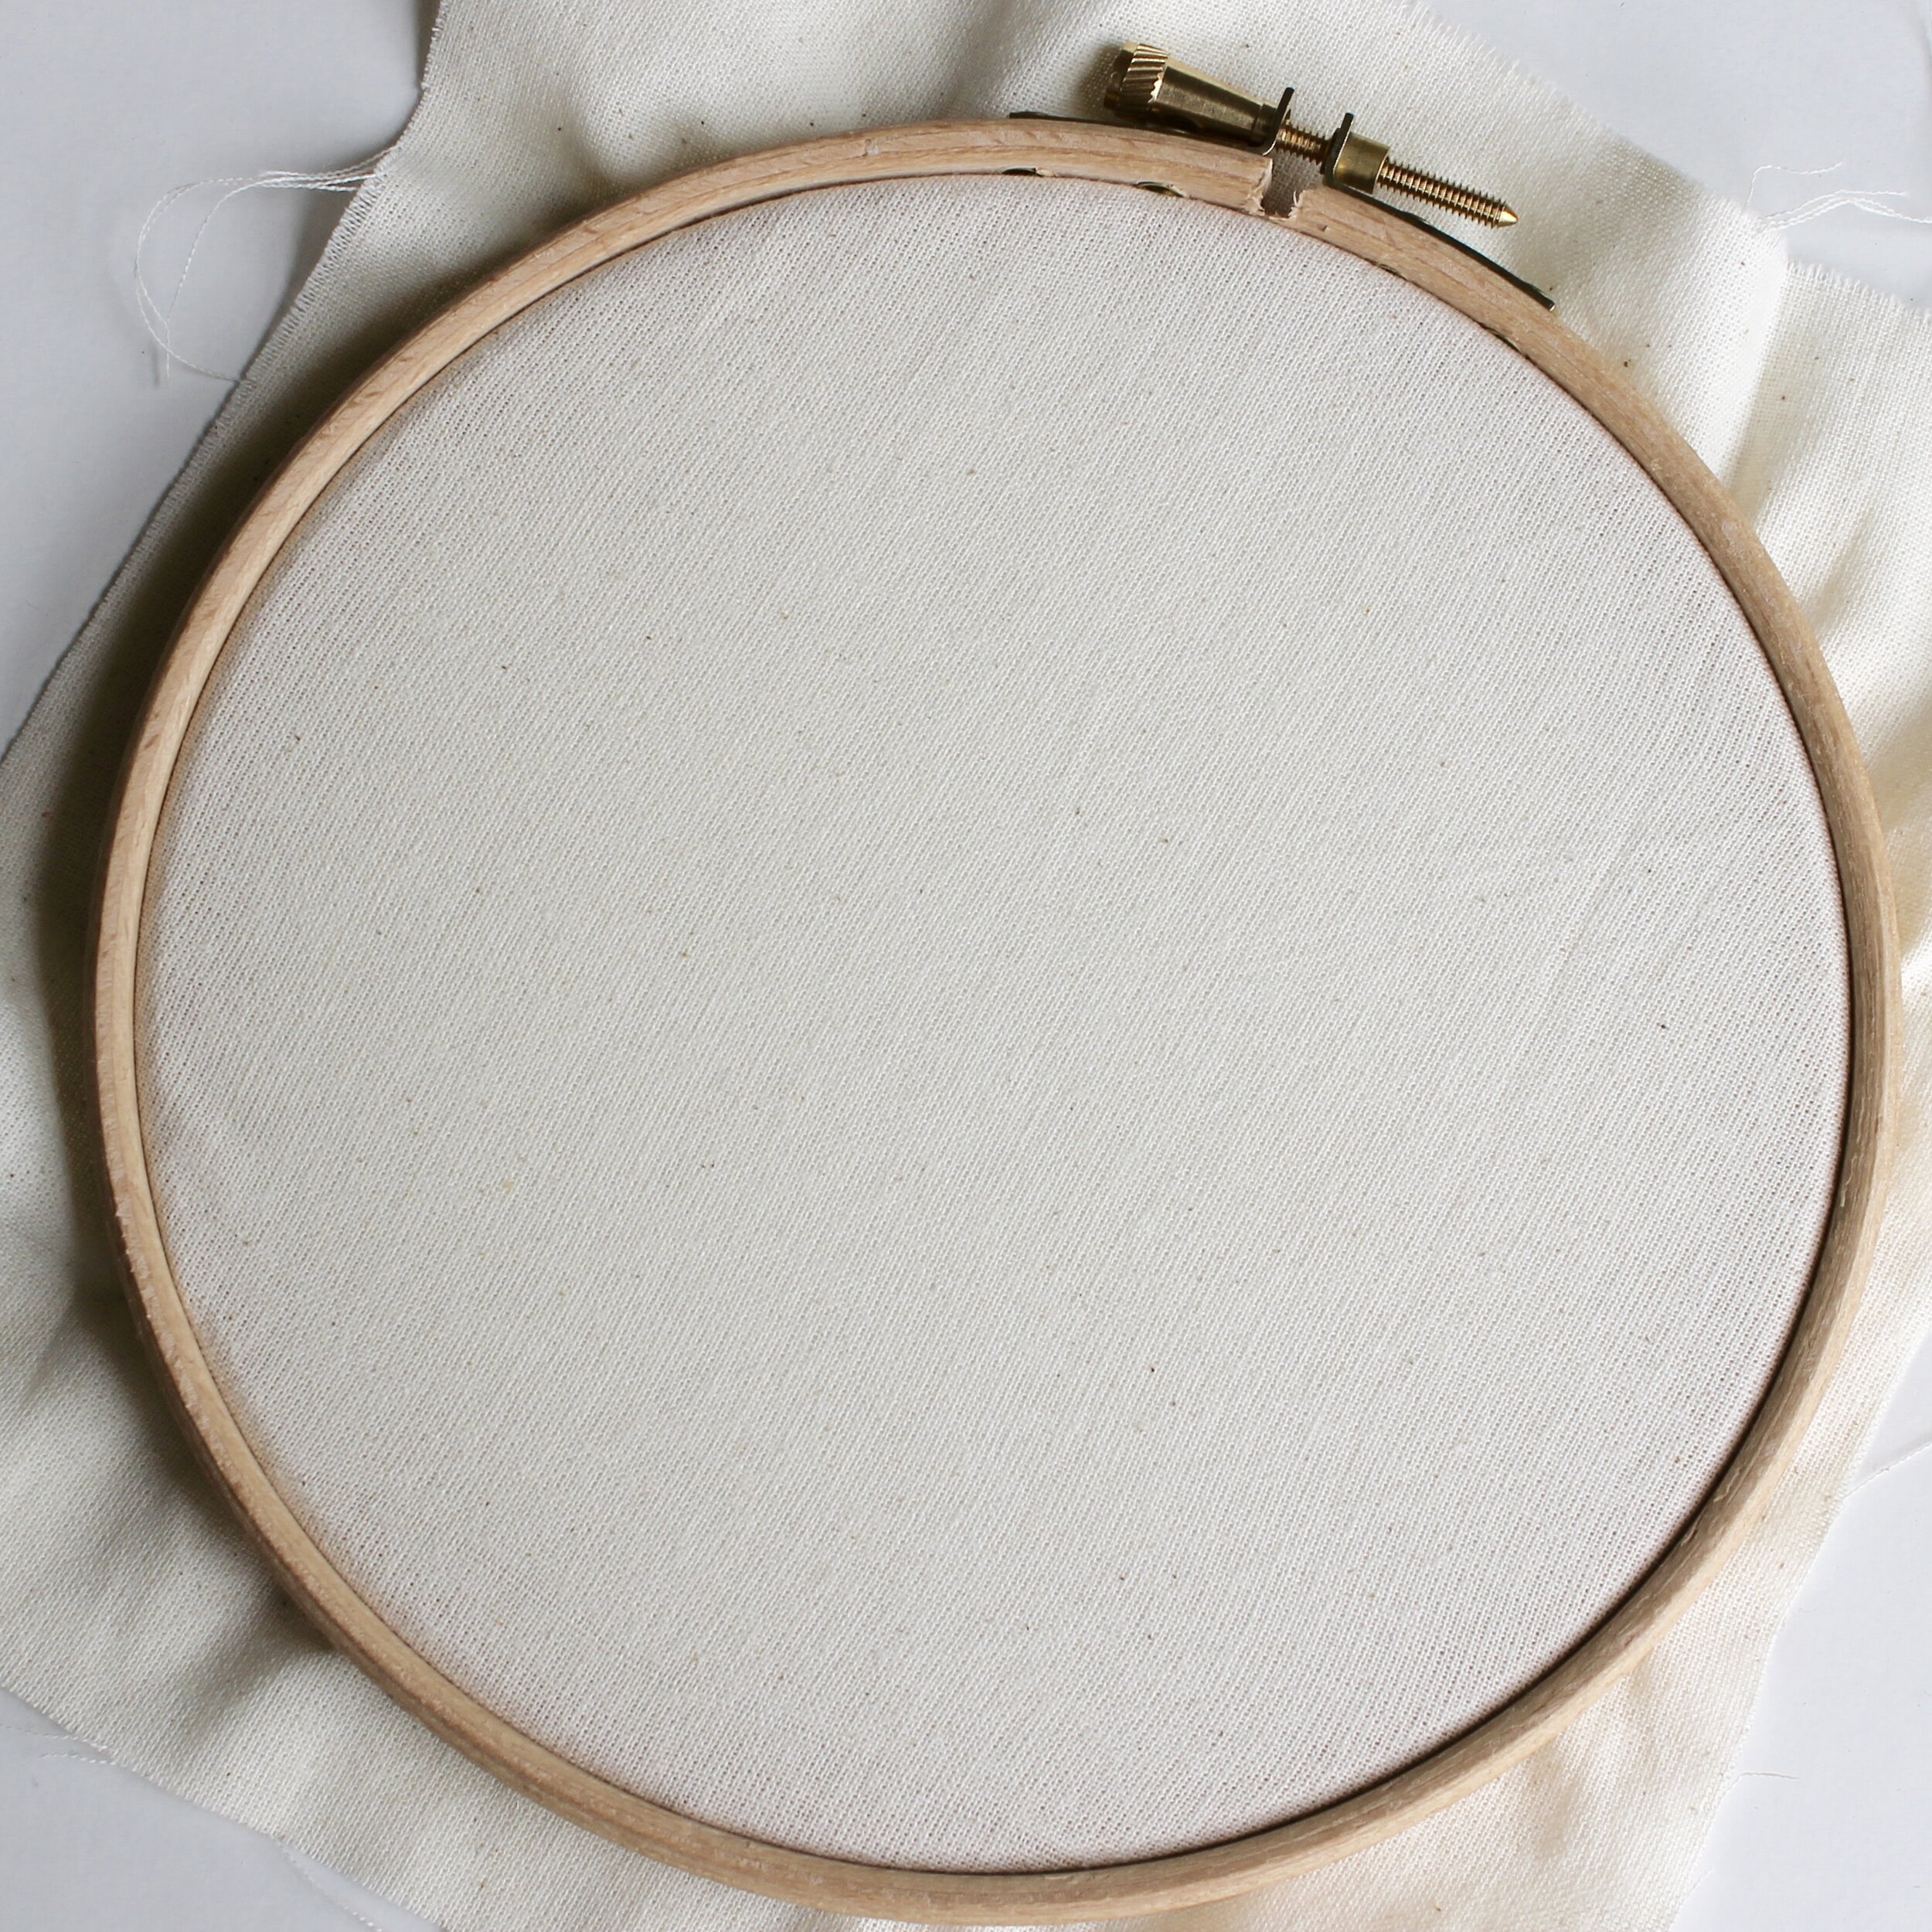 Embroidery Hoops: What are They, Their Uses, and Pictures